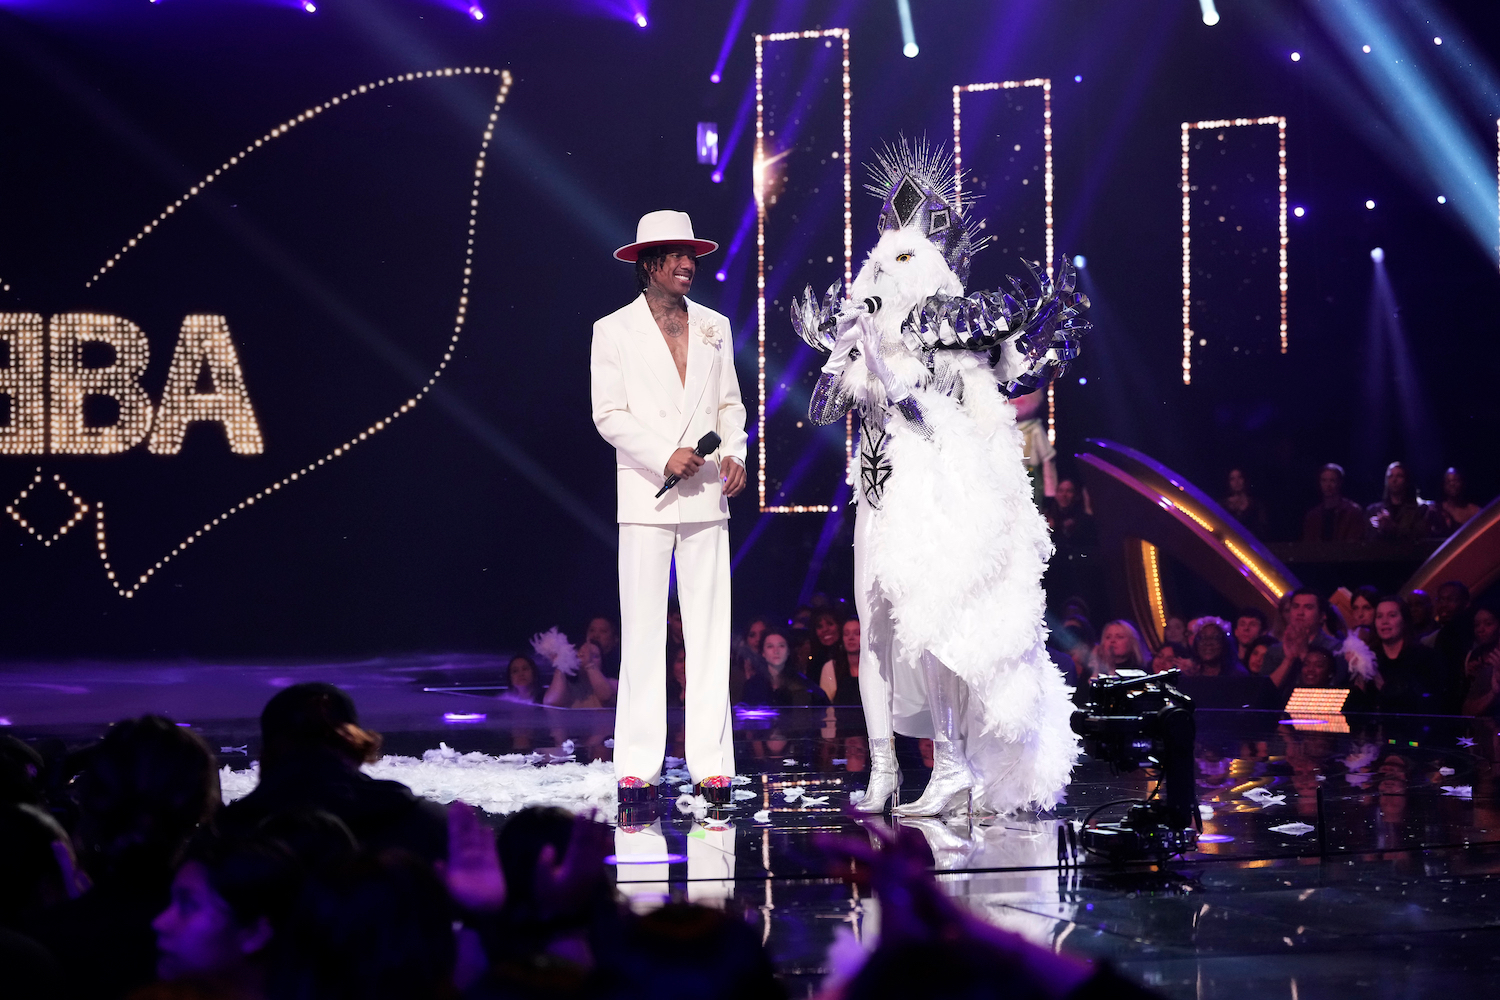 'The Masked Singer' Season 9 stage showing Nick Cannon with Debbie Gibson as Night Owl